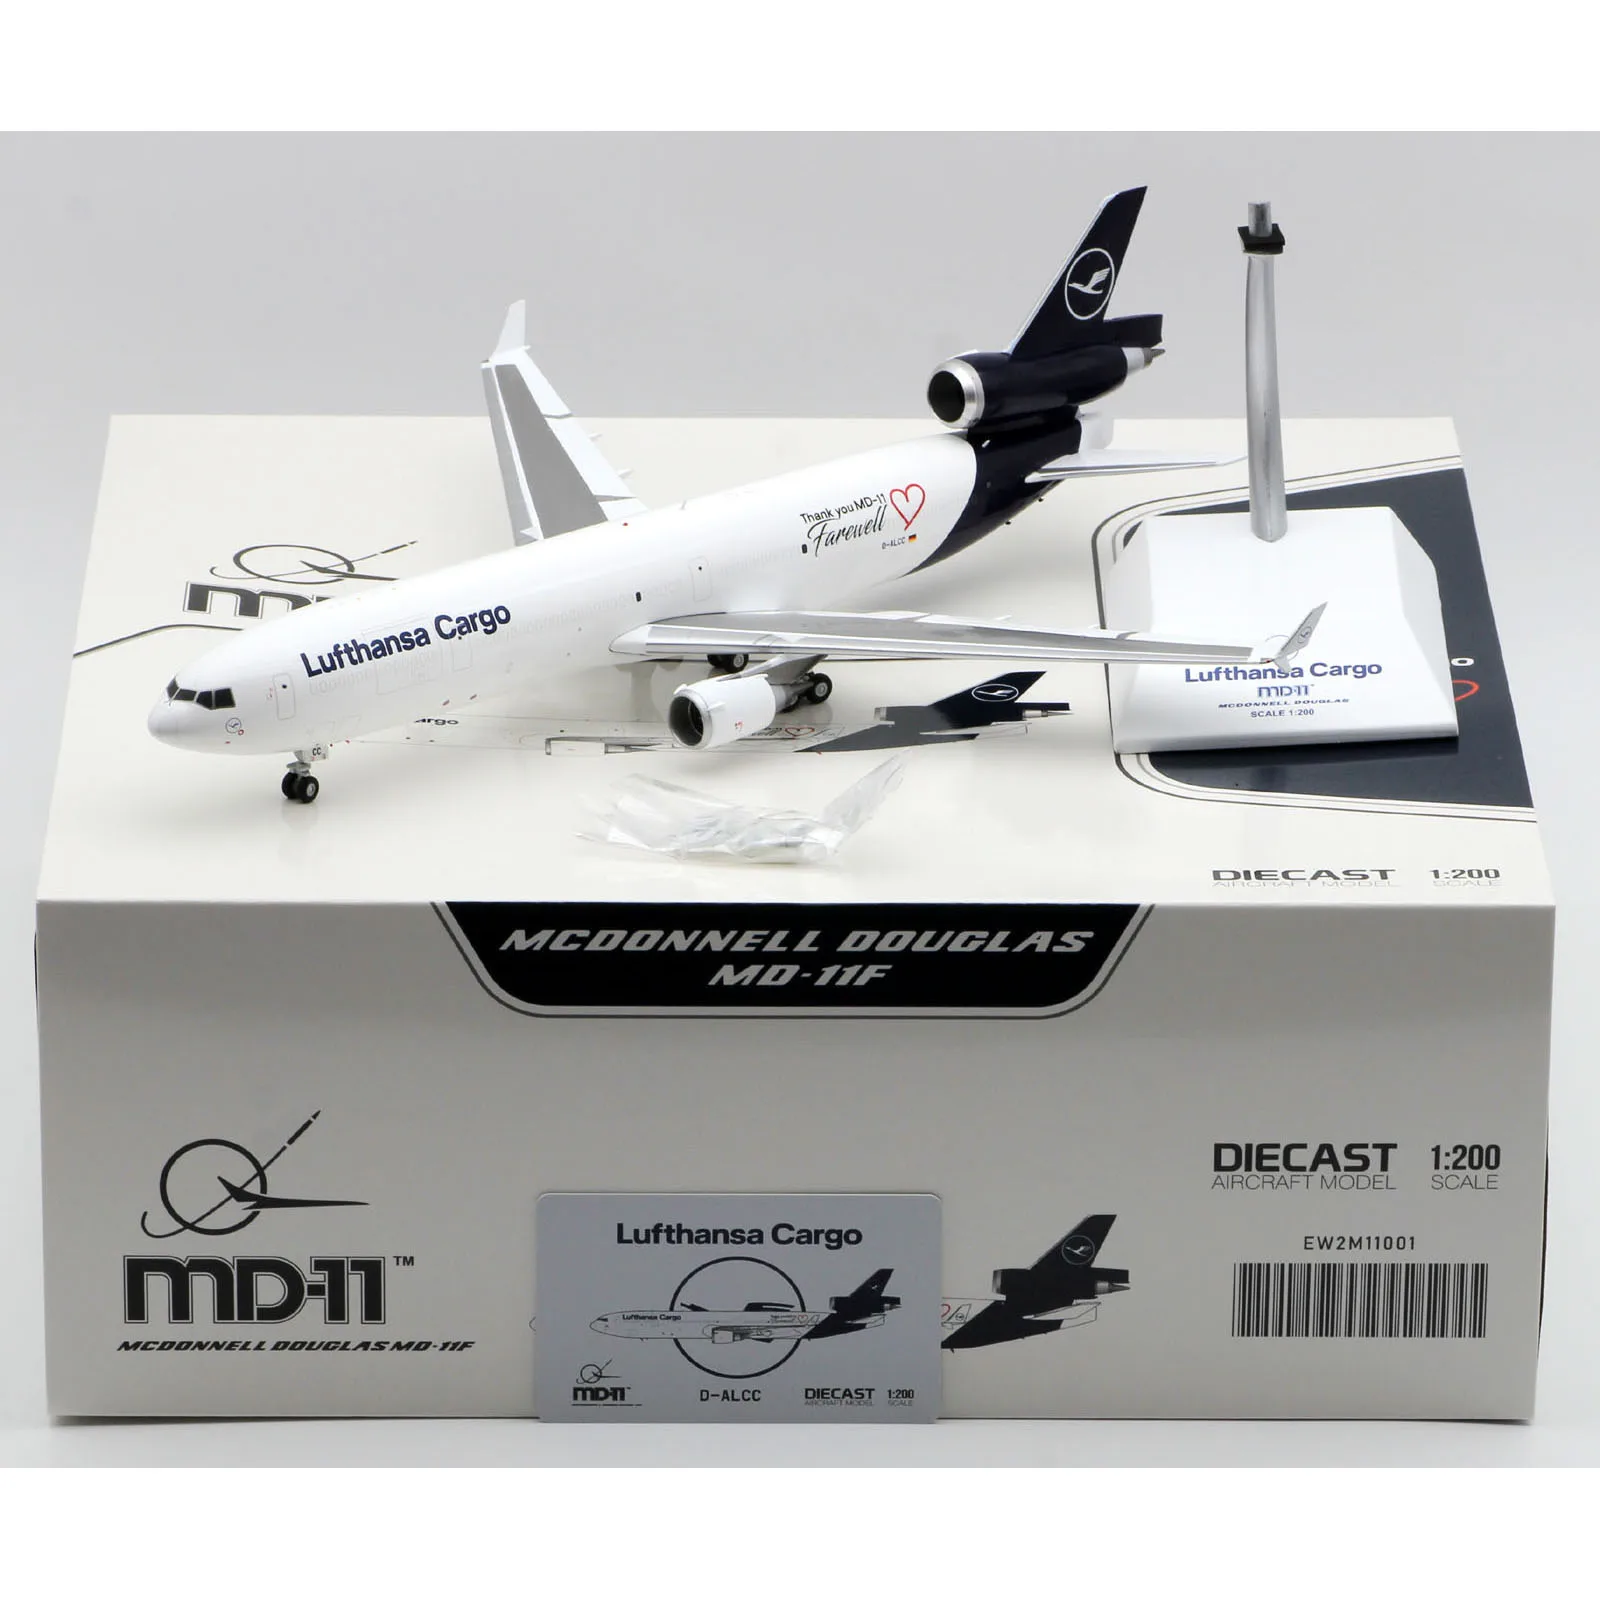 

EW2M11001 Alloy Collectible Plane Gift JC Wings 1:200 Lufthansa Cargo MCDONNELL Douglas MD-11 Diecast Aircraft Jet Model D-ALCC